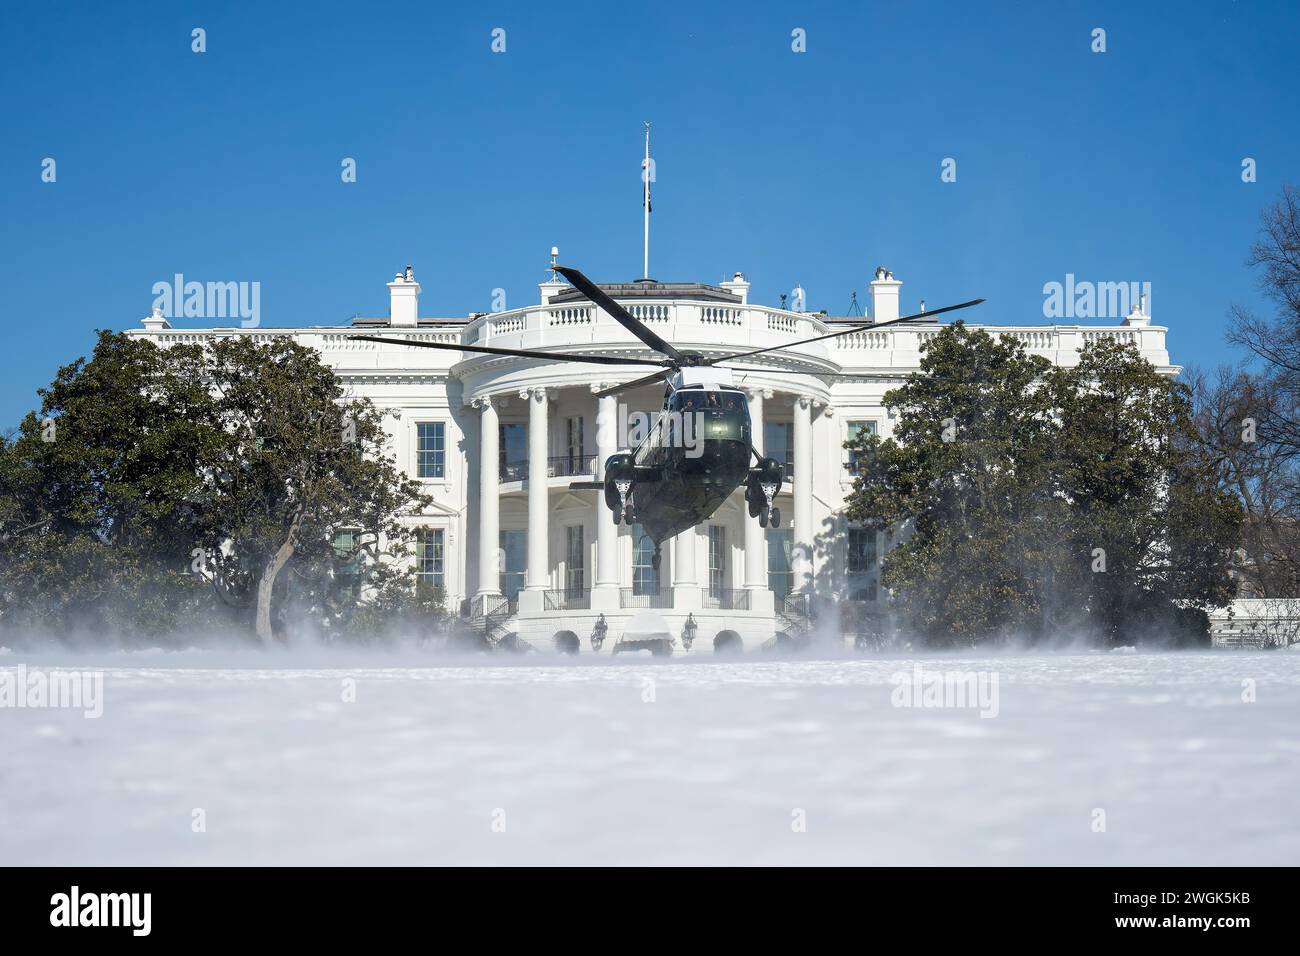 President Joe Biden disembarks Marine One on the South Lawn of the White House, Monday, January 22, 2024, after spending the weekend in Delaware.(Official White House Photo by Oliver Contreras) Stock Photo